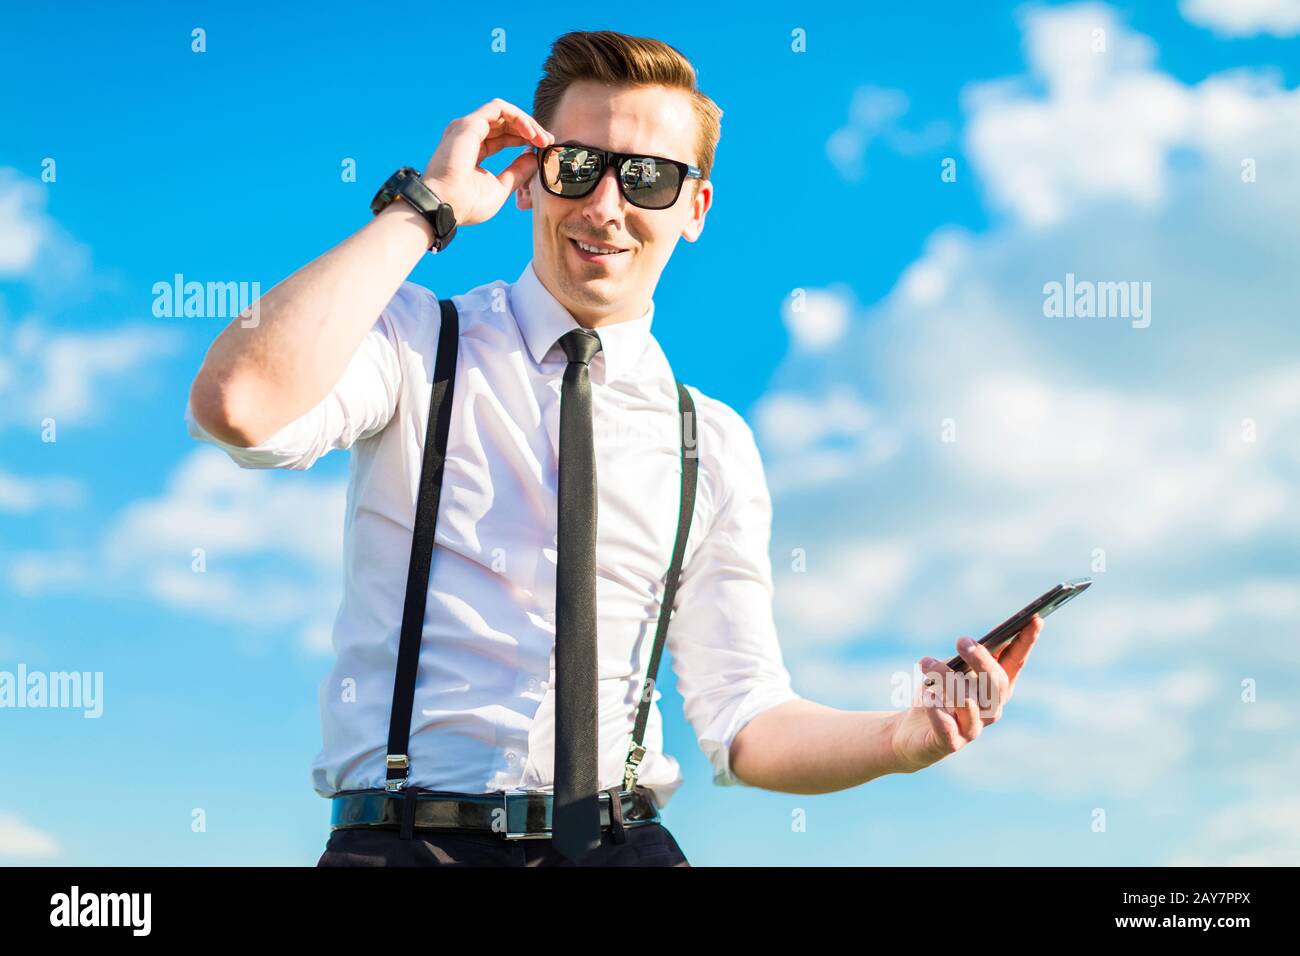 Attractive busunessman in white shirt, tie, braces and sunglasse Stock Photo